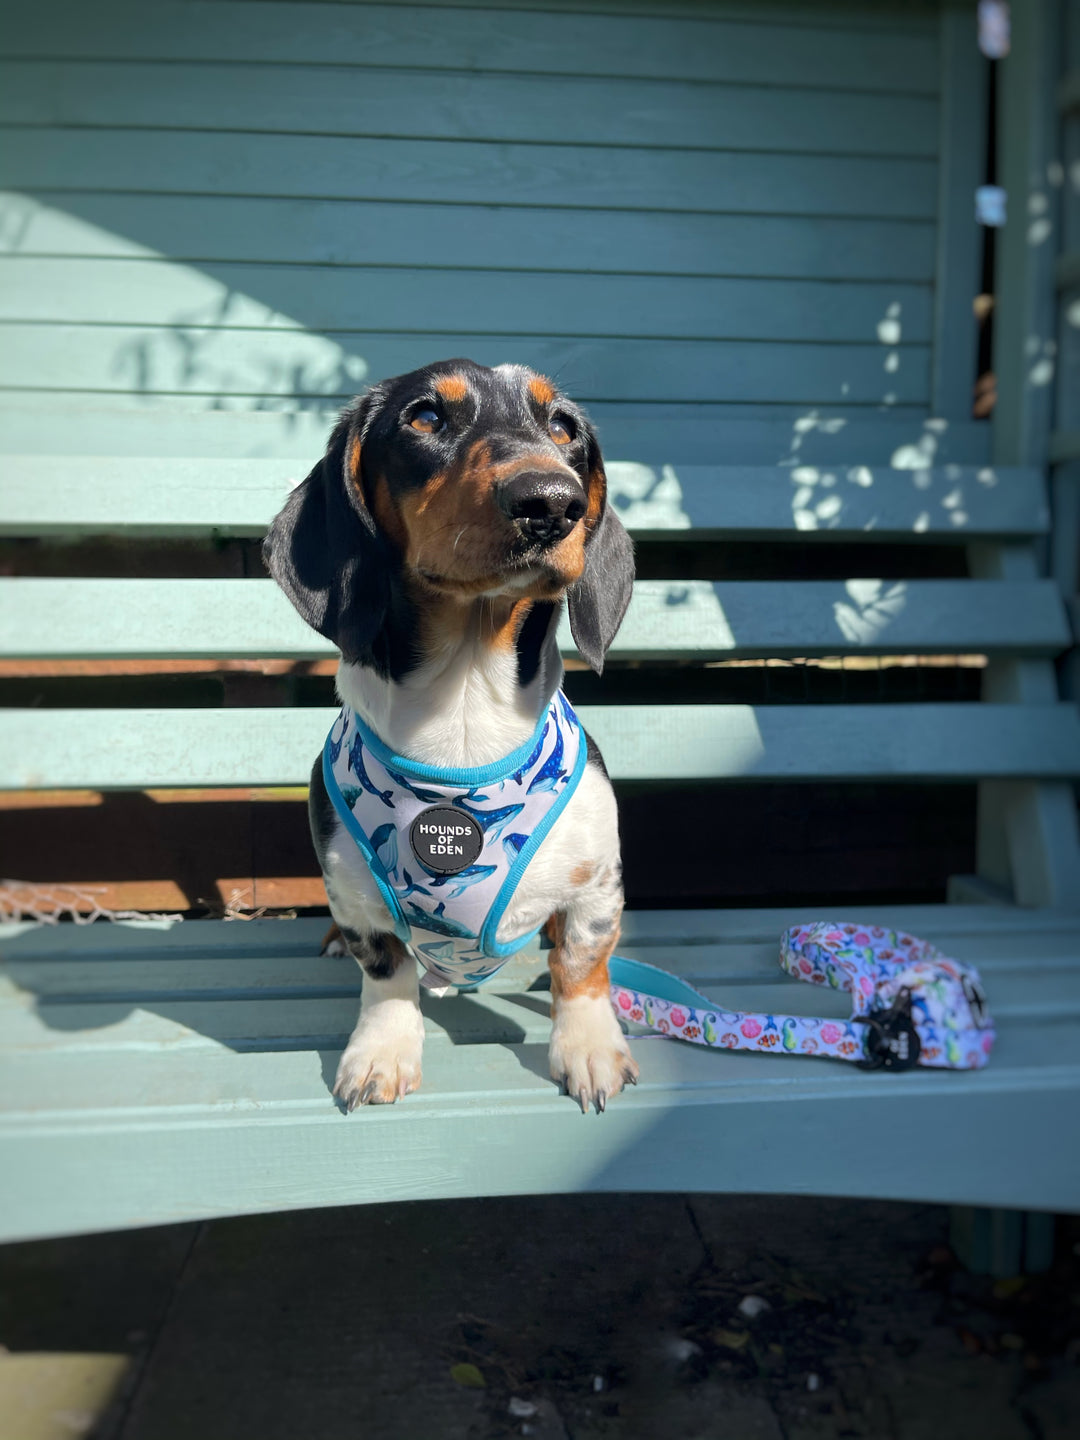 'Whale of a Time' - Sea Themed Reversible Dog Harness